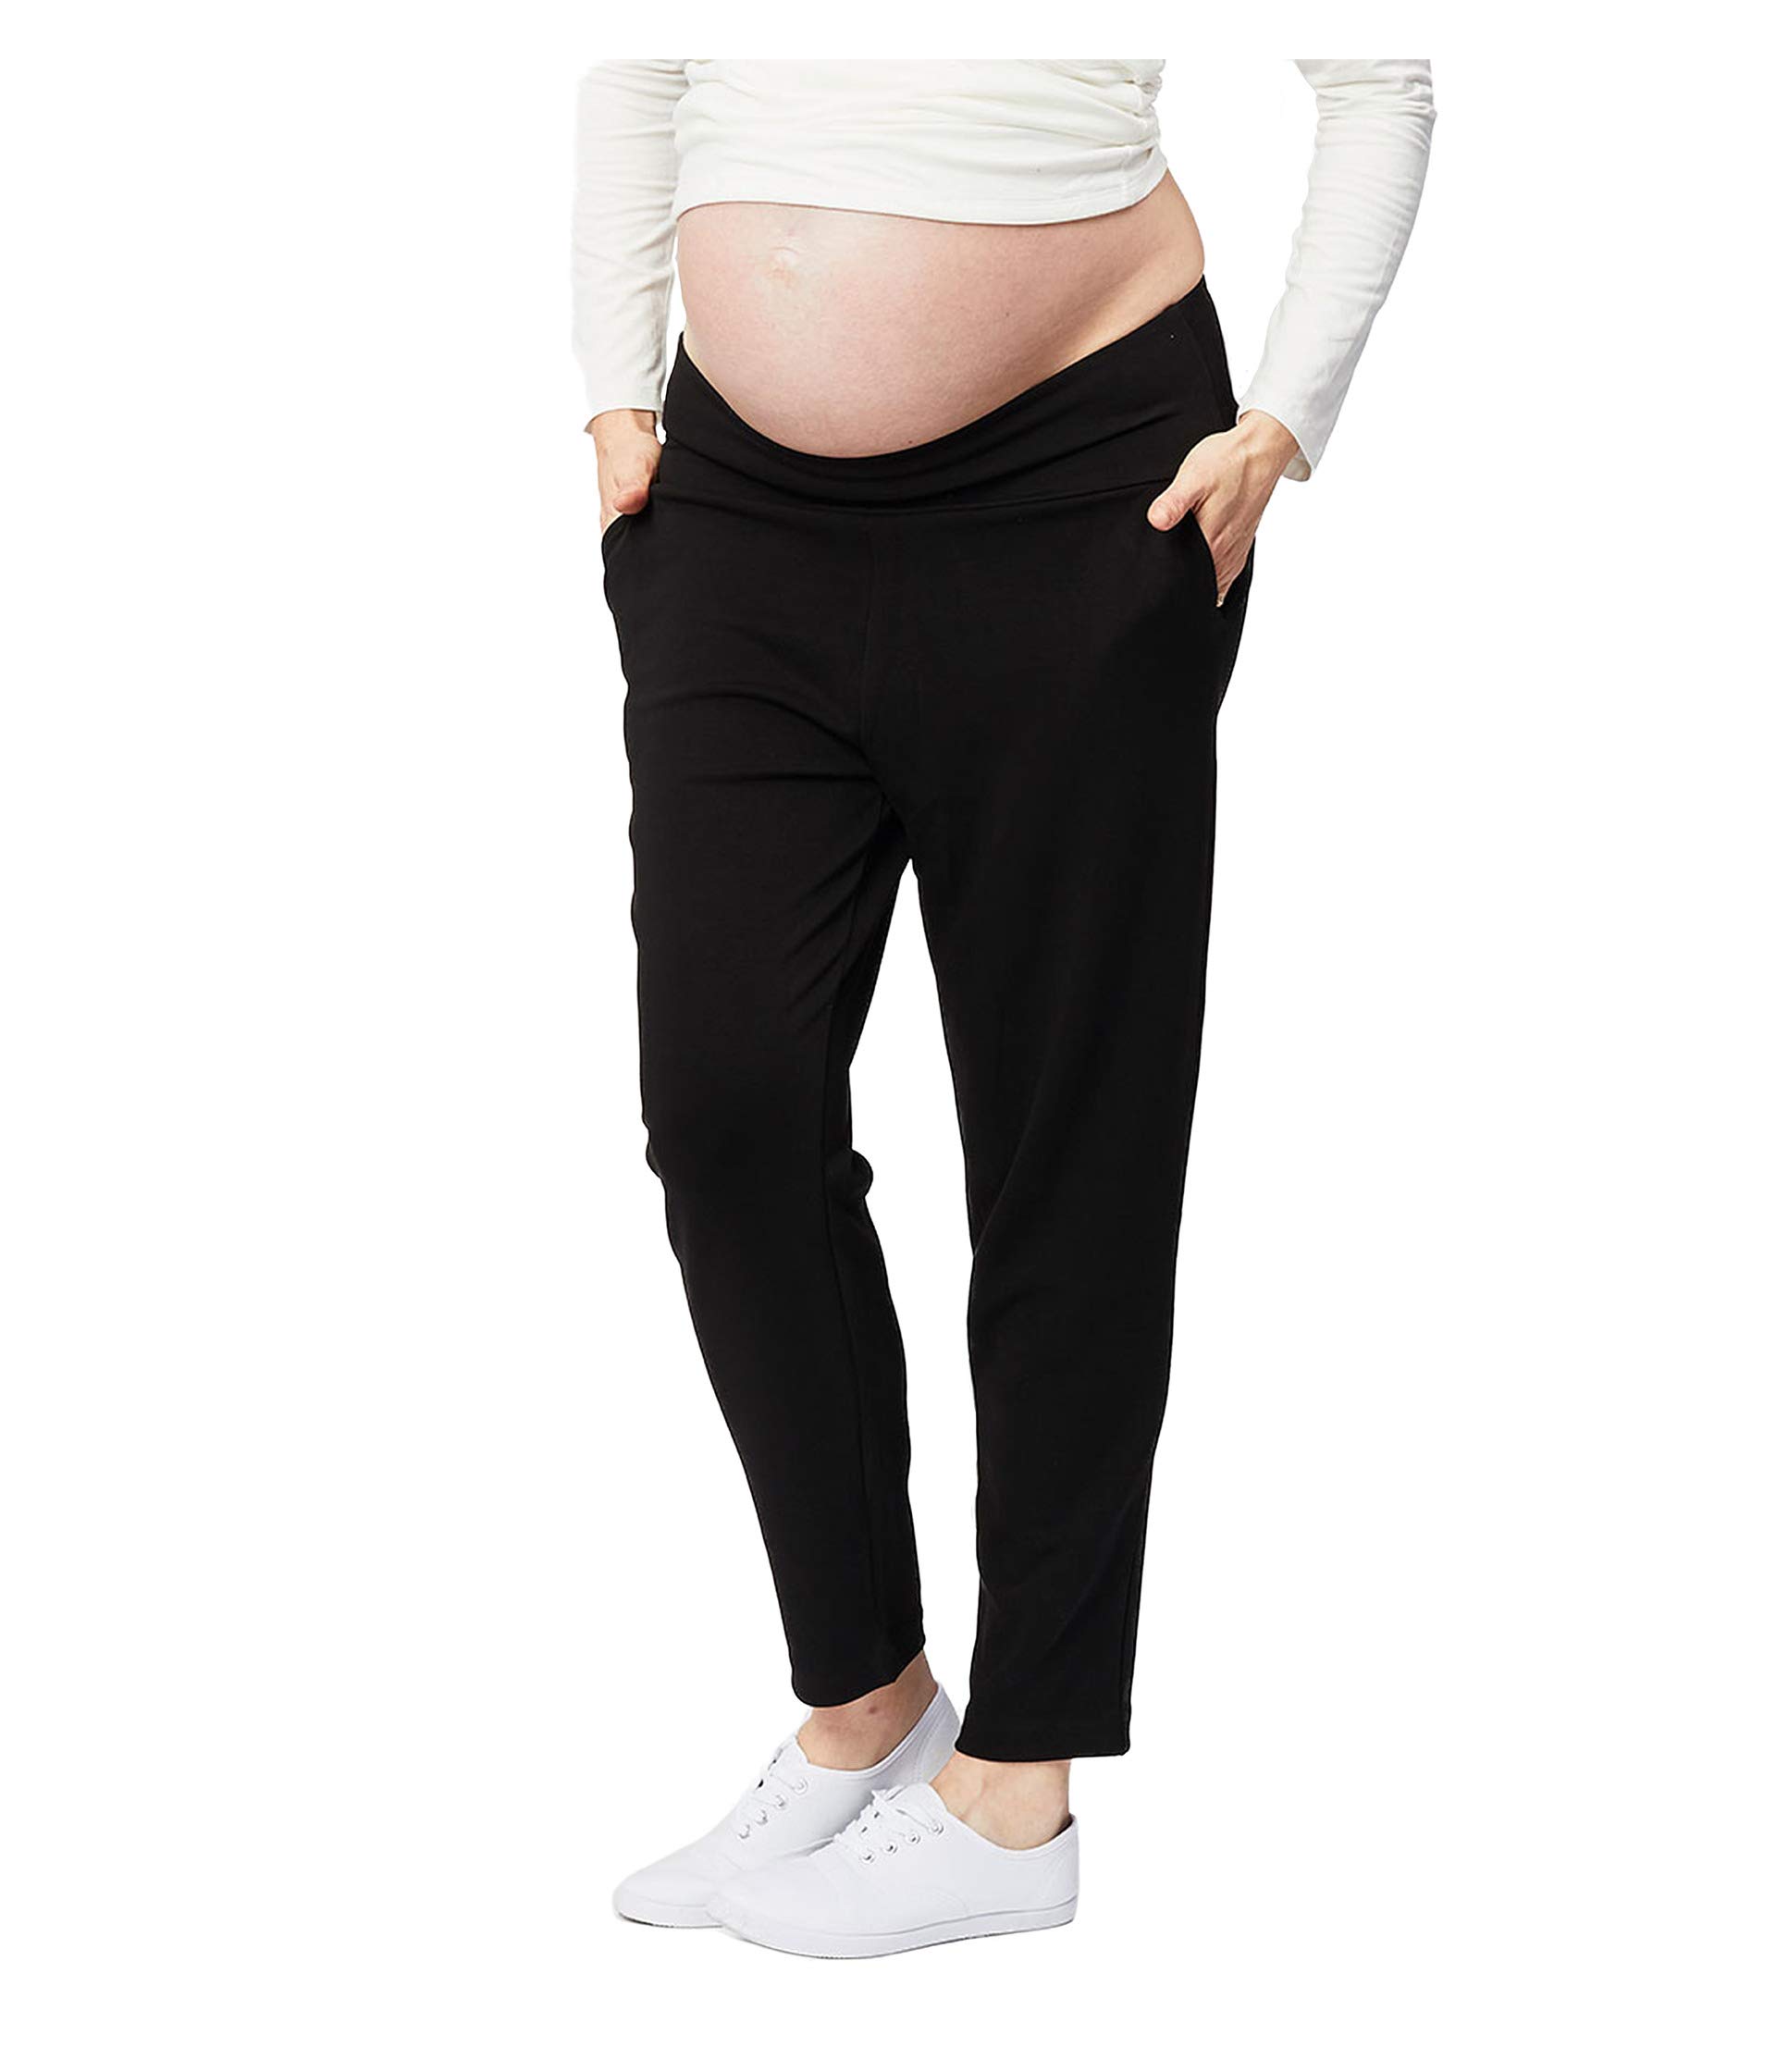 wilkerson charmaine black cake Брюки Cake Maternity, Relaxed Soft Ponte Pants